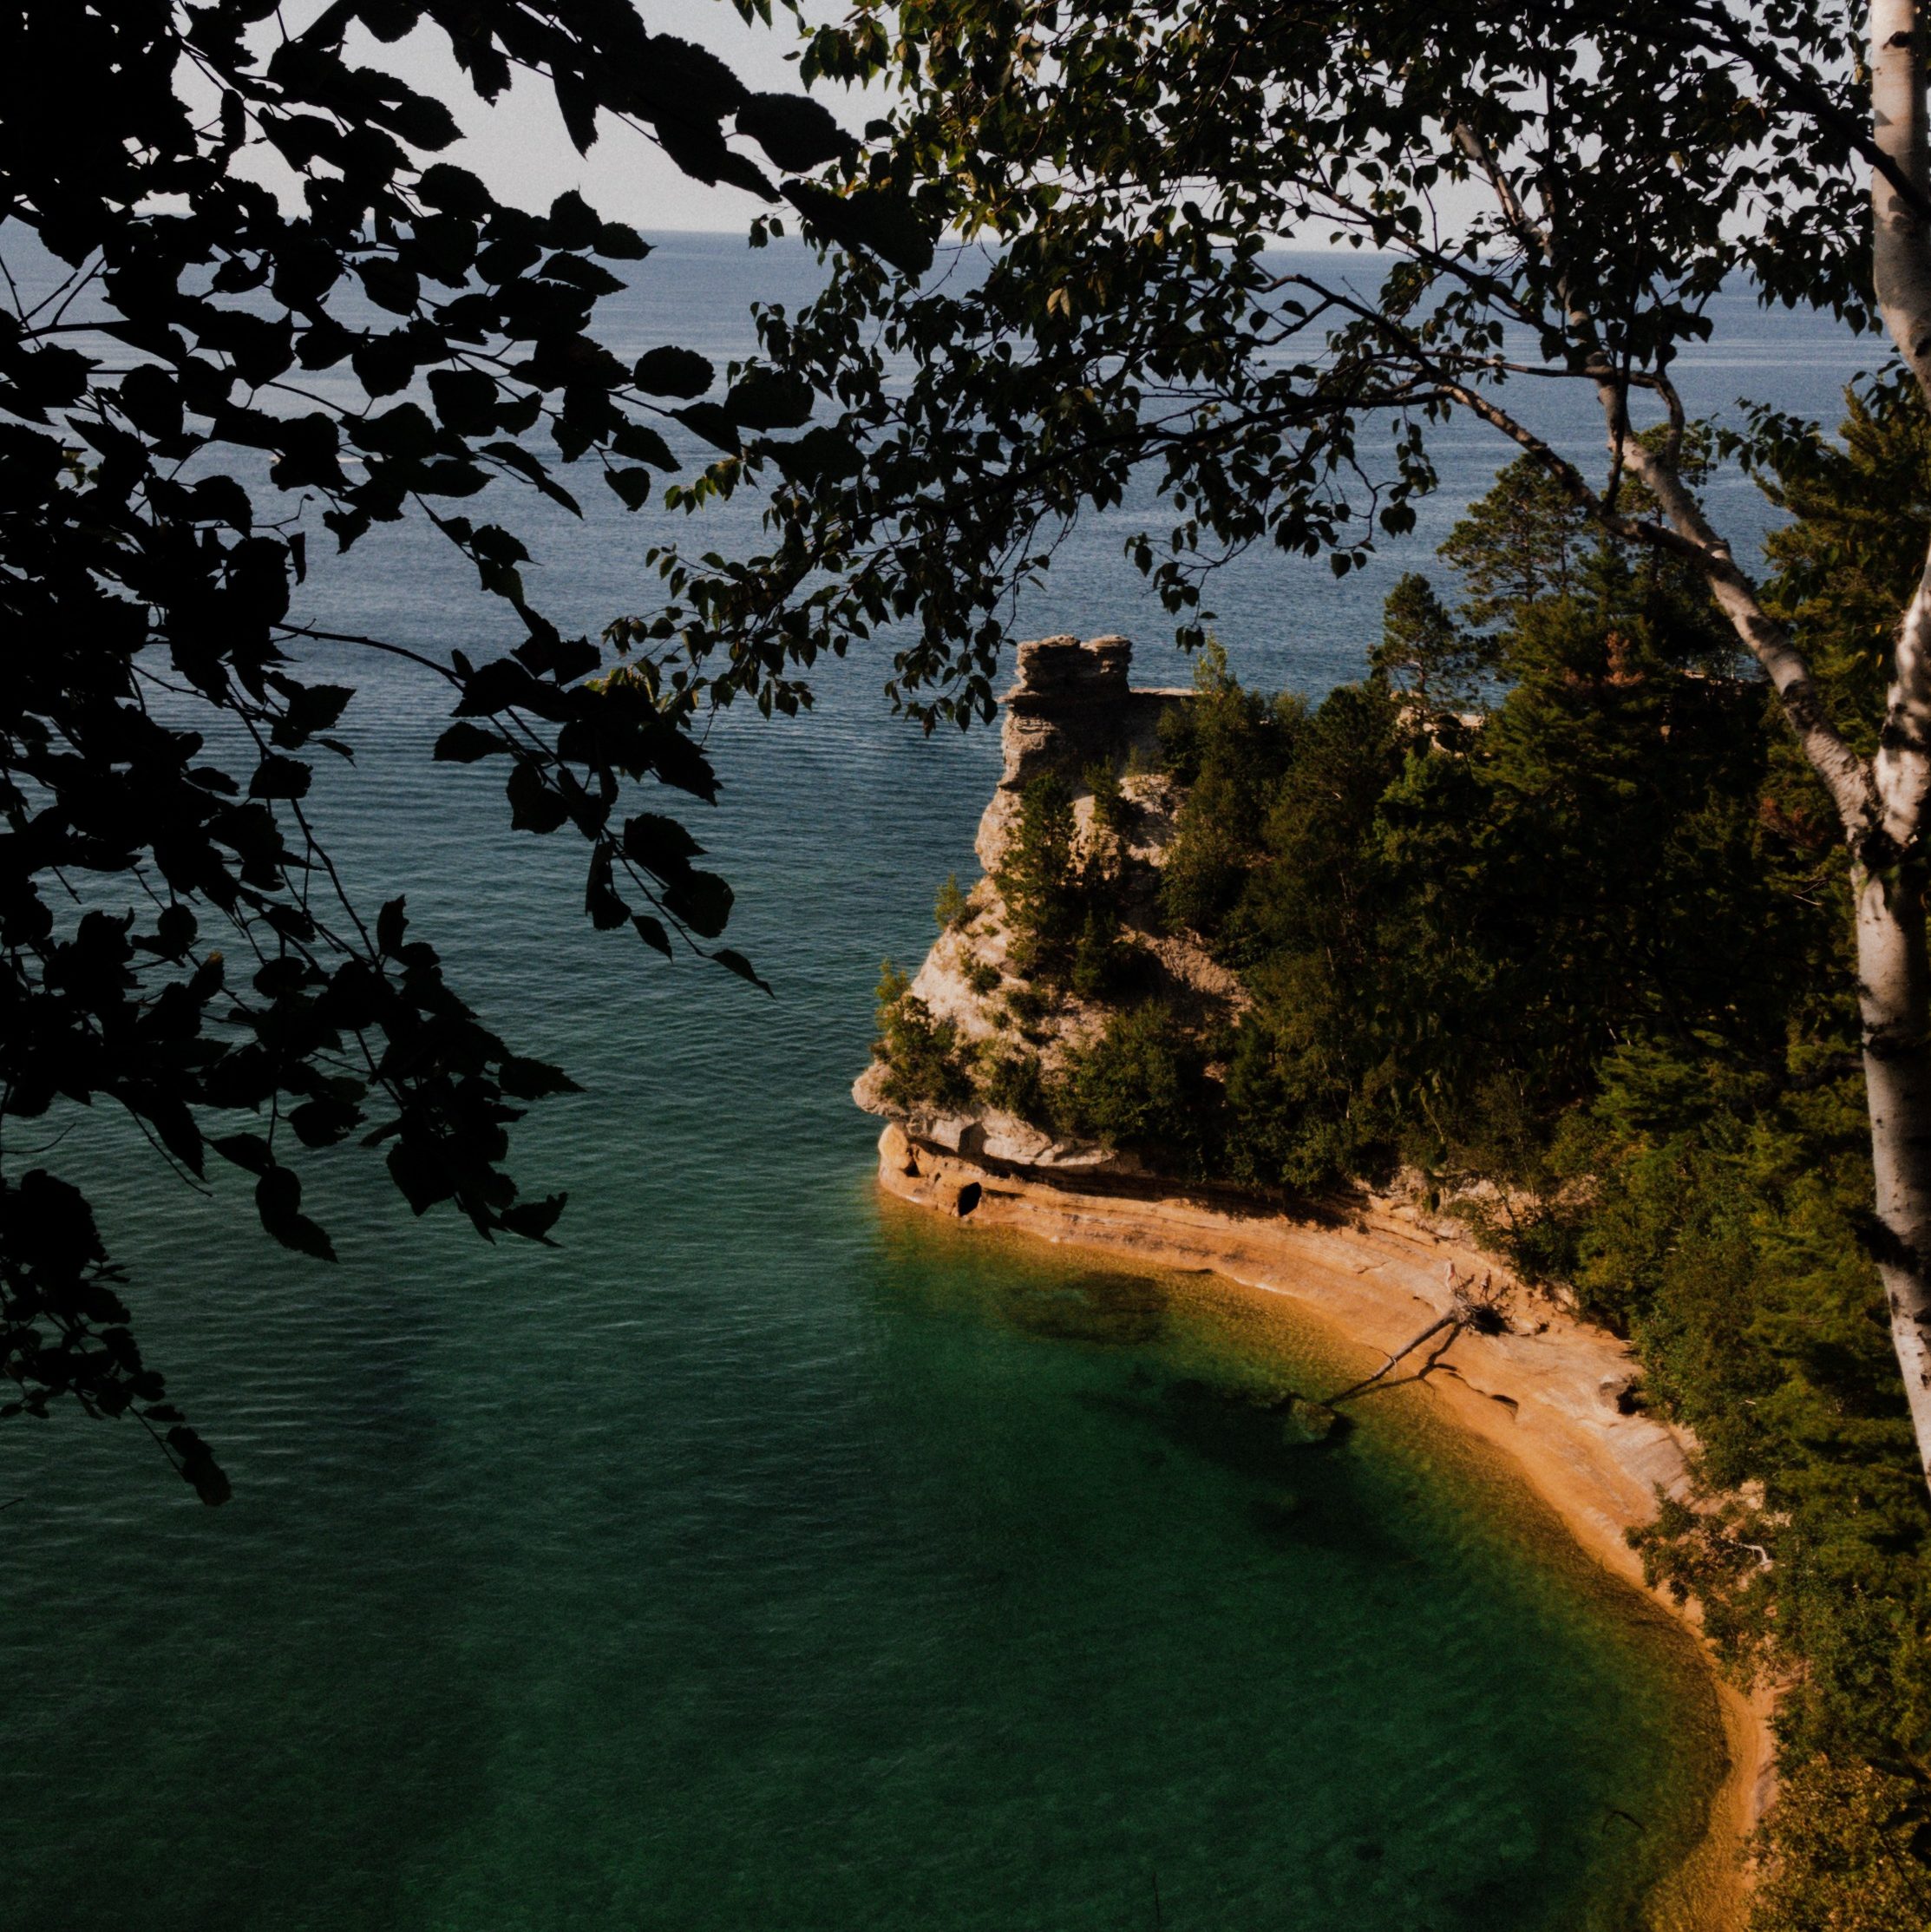 Miners Castle in Pictured Rocks is surrounded by water